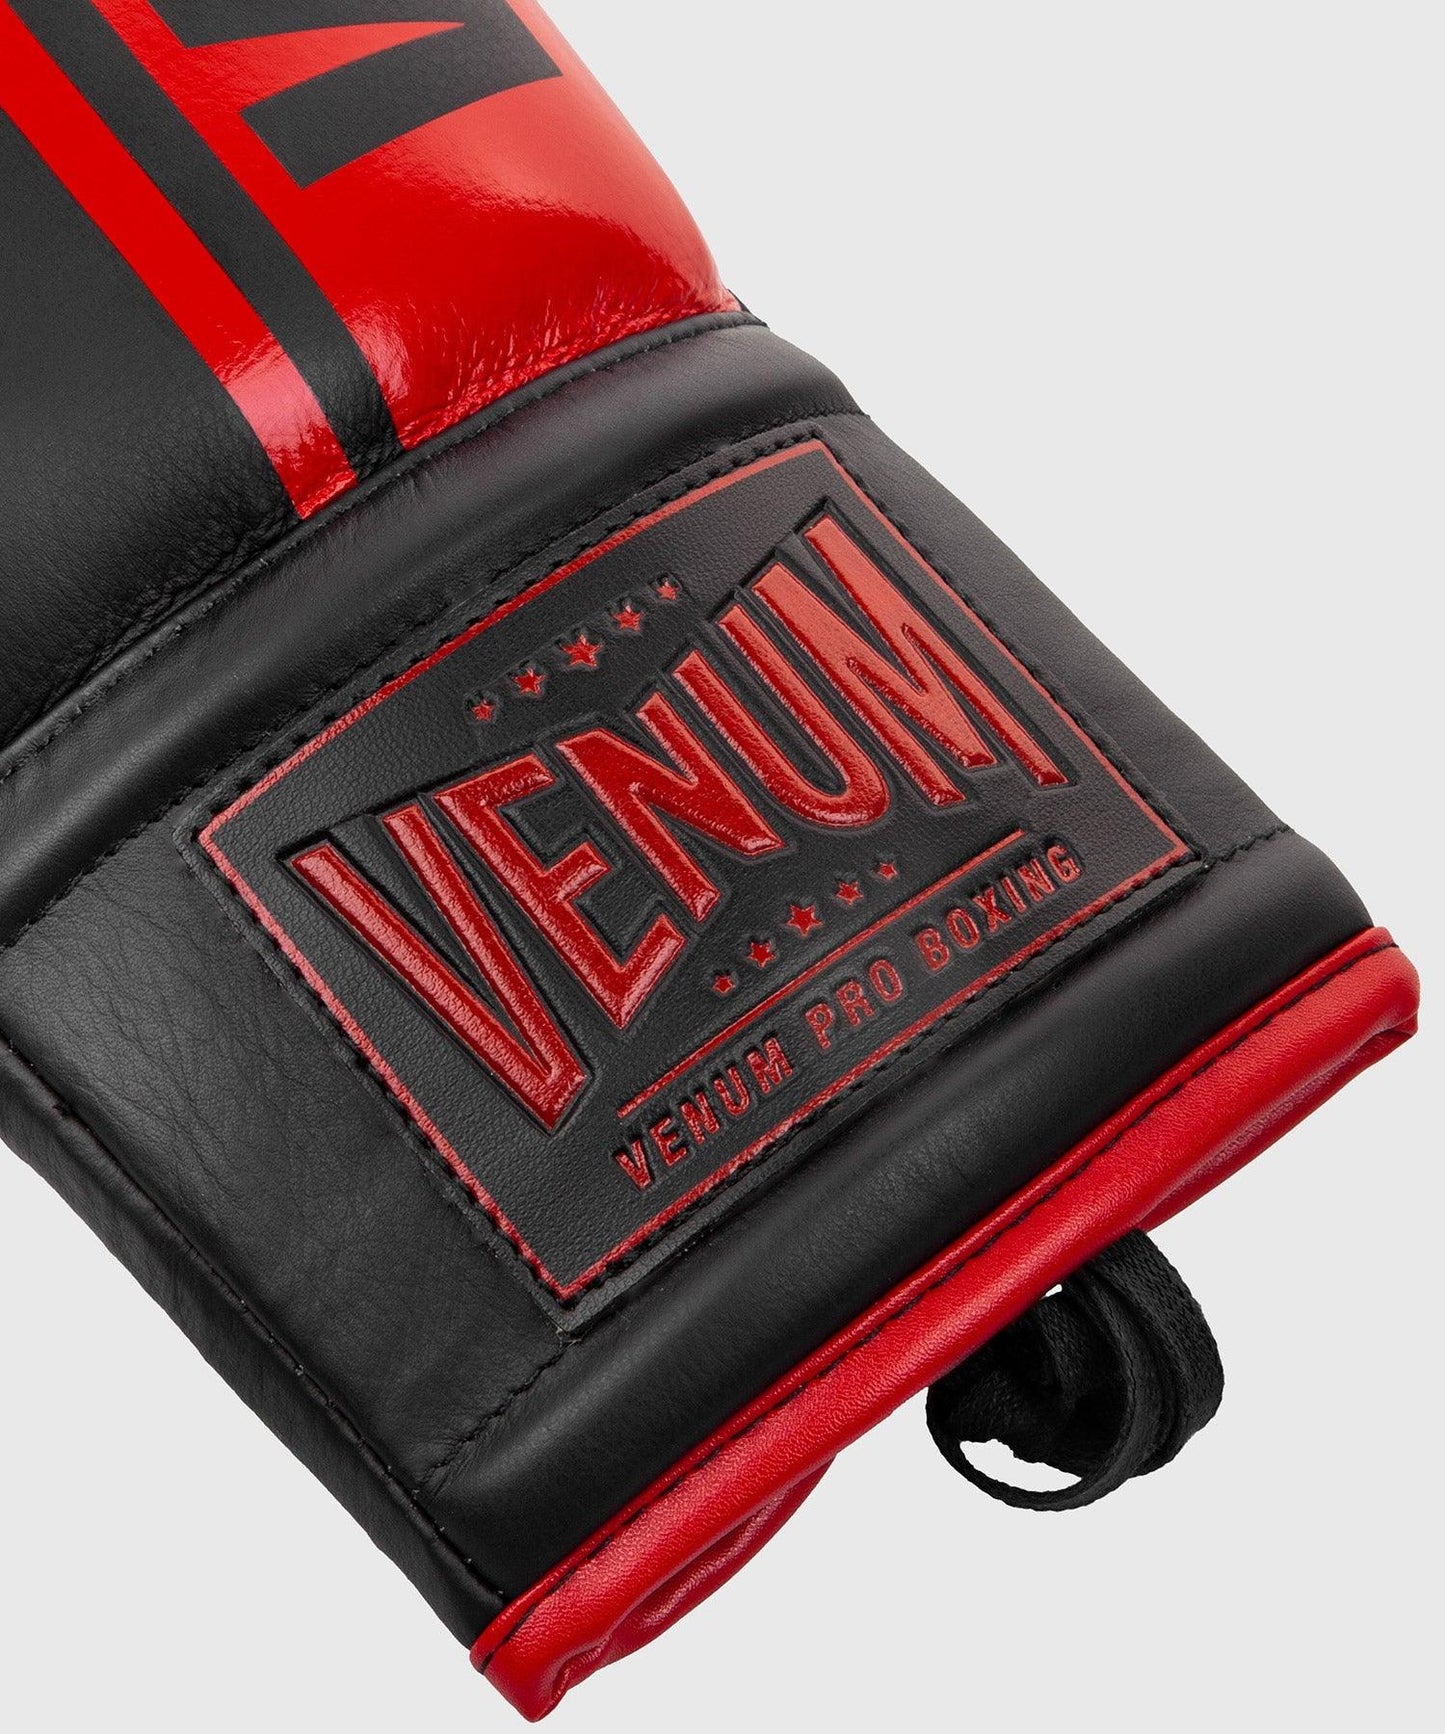 Venum Shield Pro Boxing Gloves - With Laces - Black/Red Picture 8